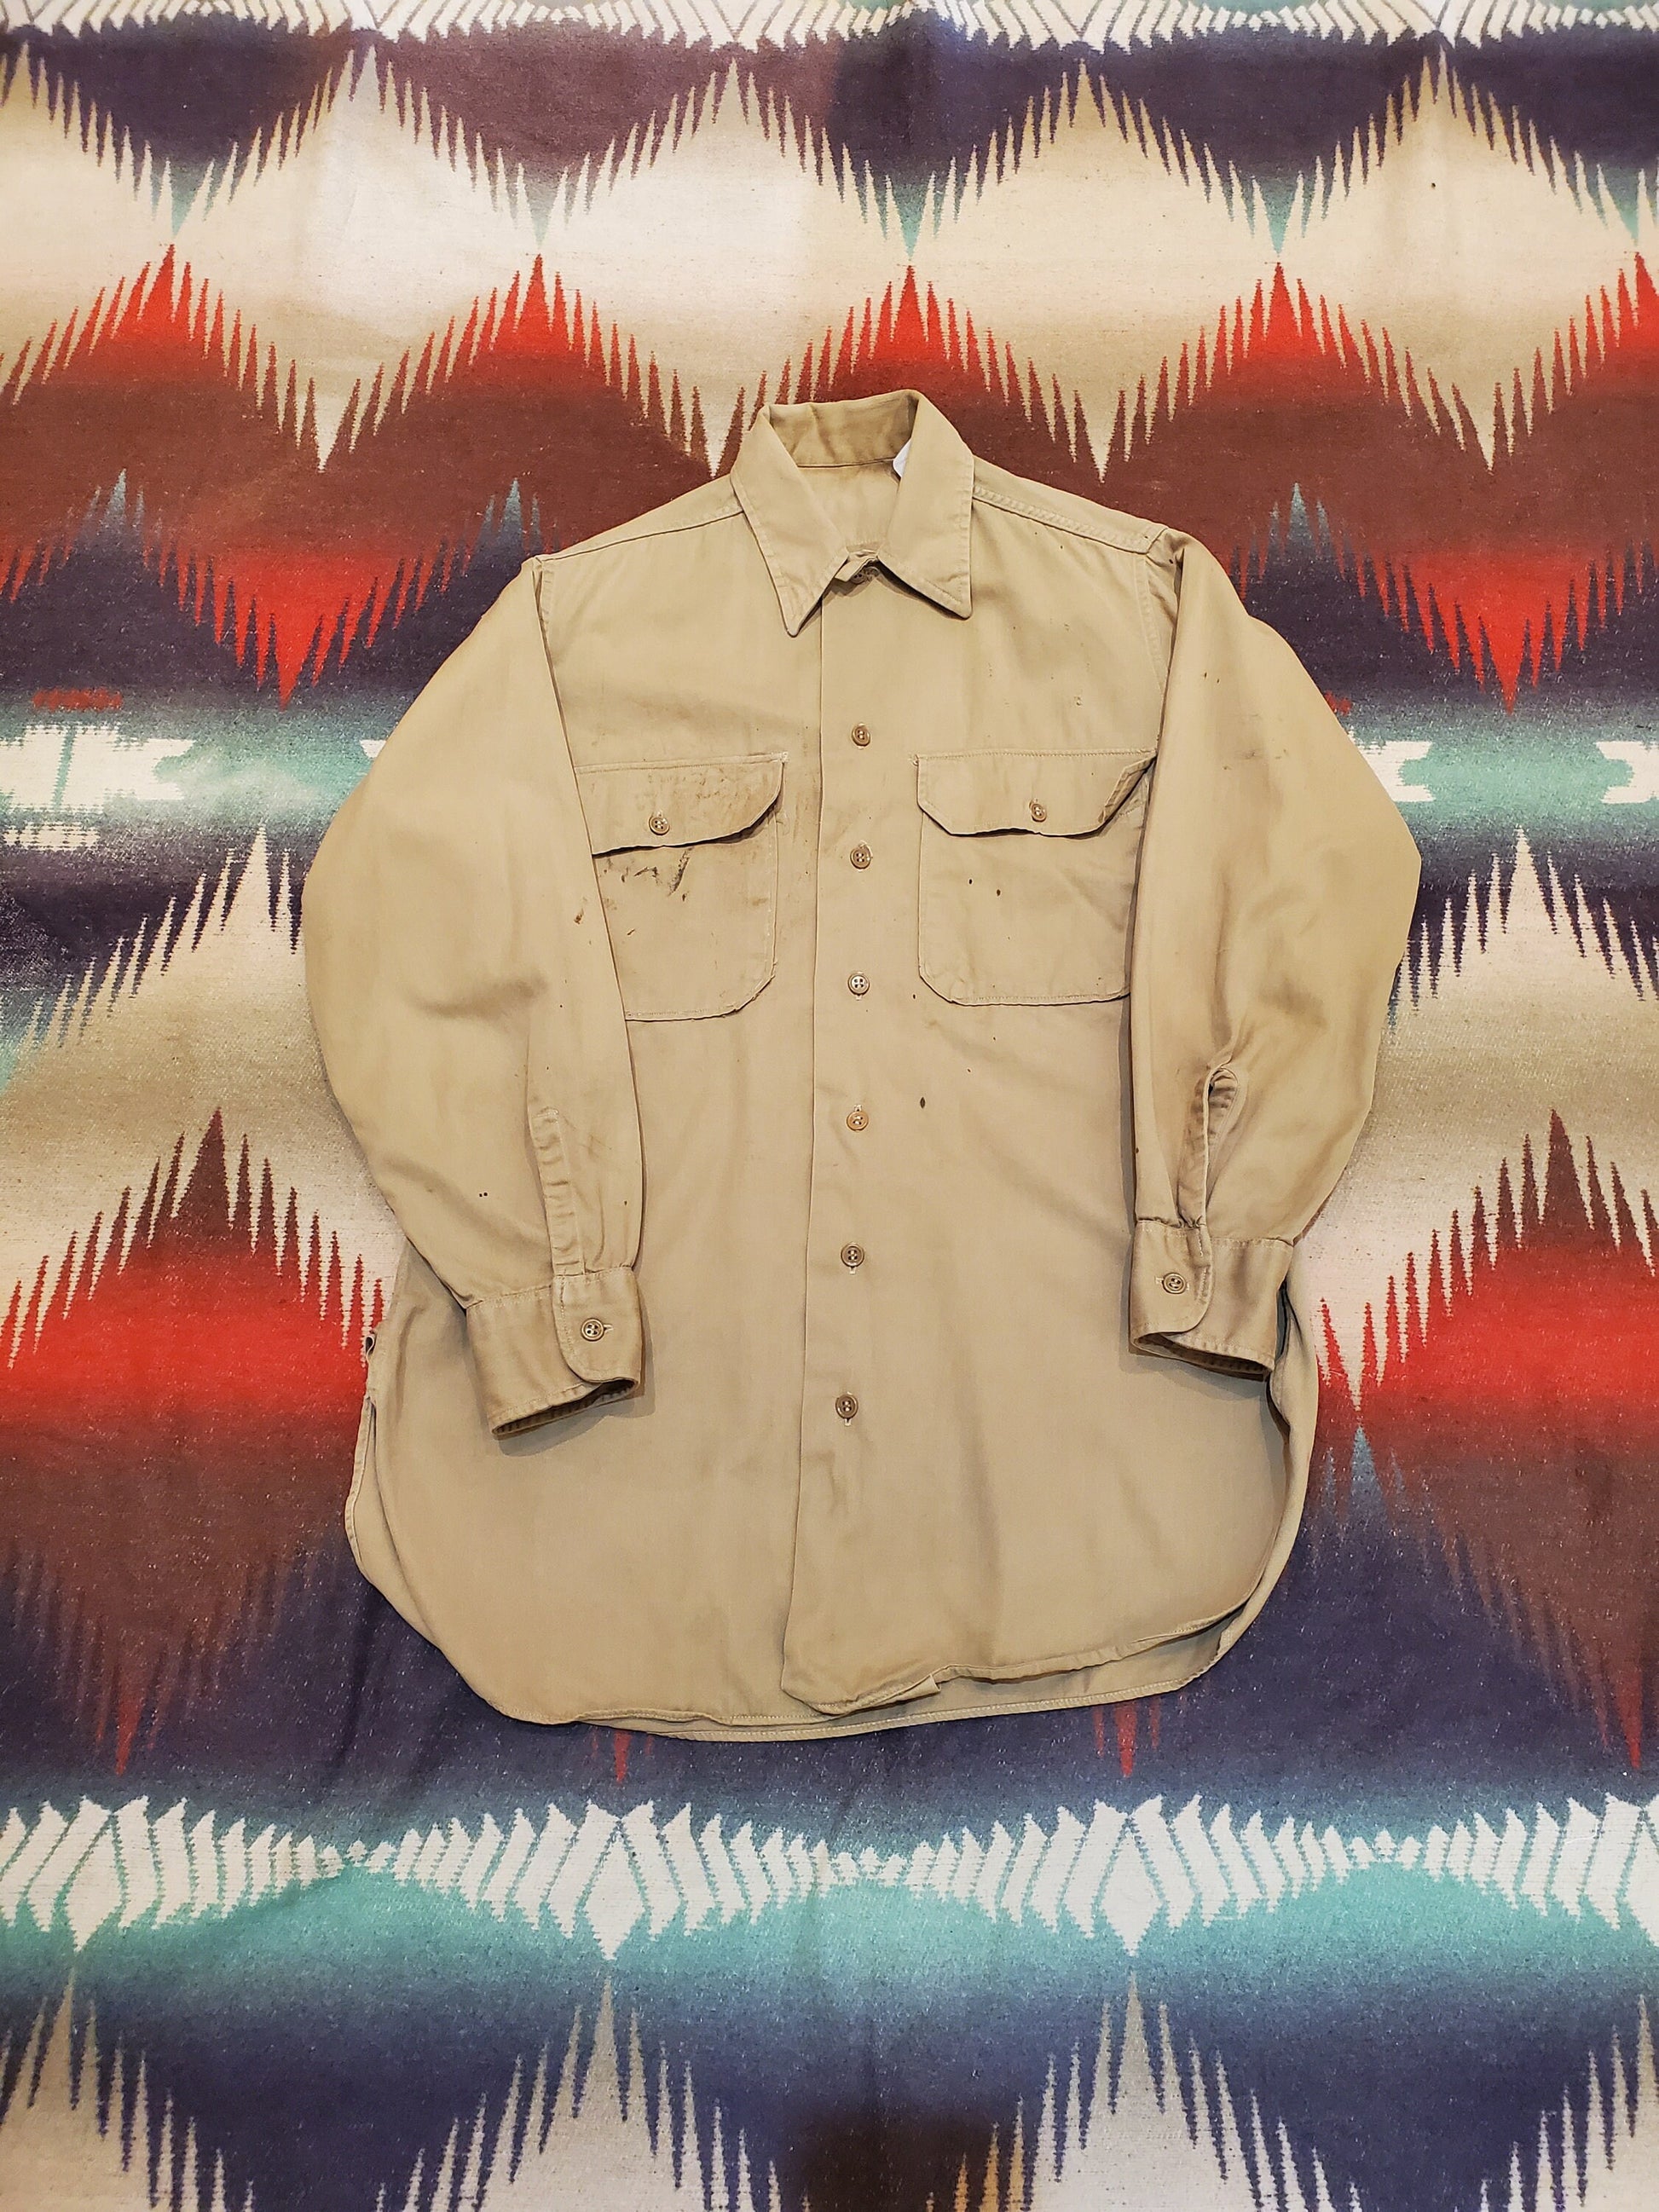 1940s Cotton Work Shirt Made in USA Size S/M